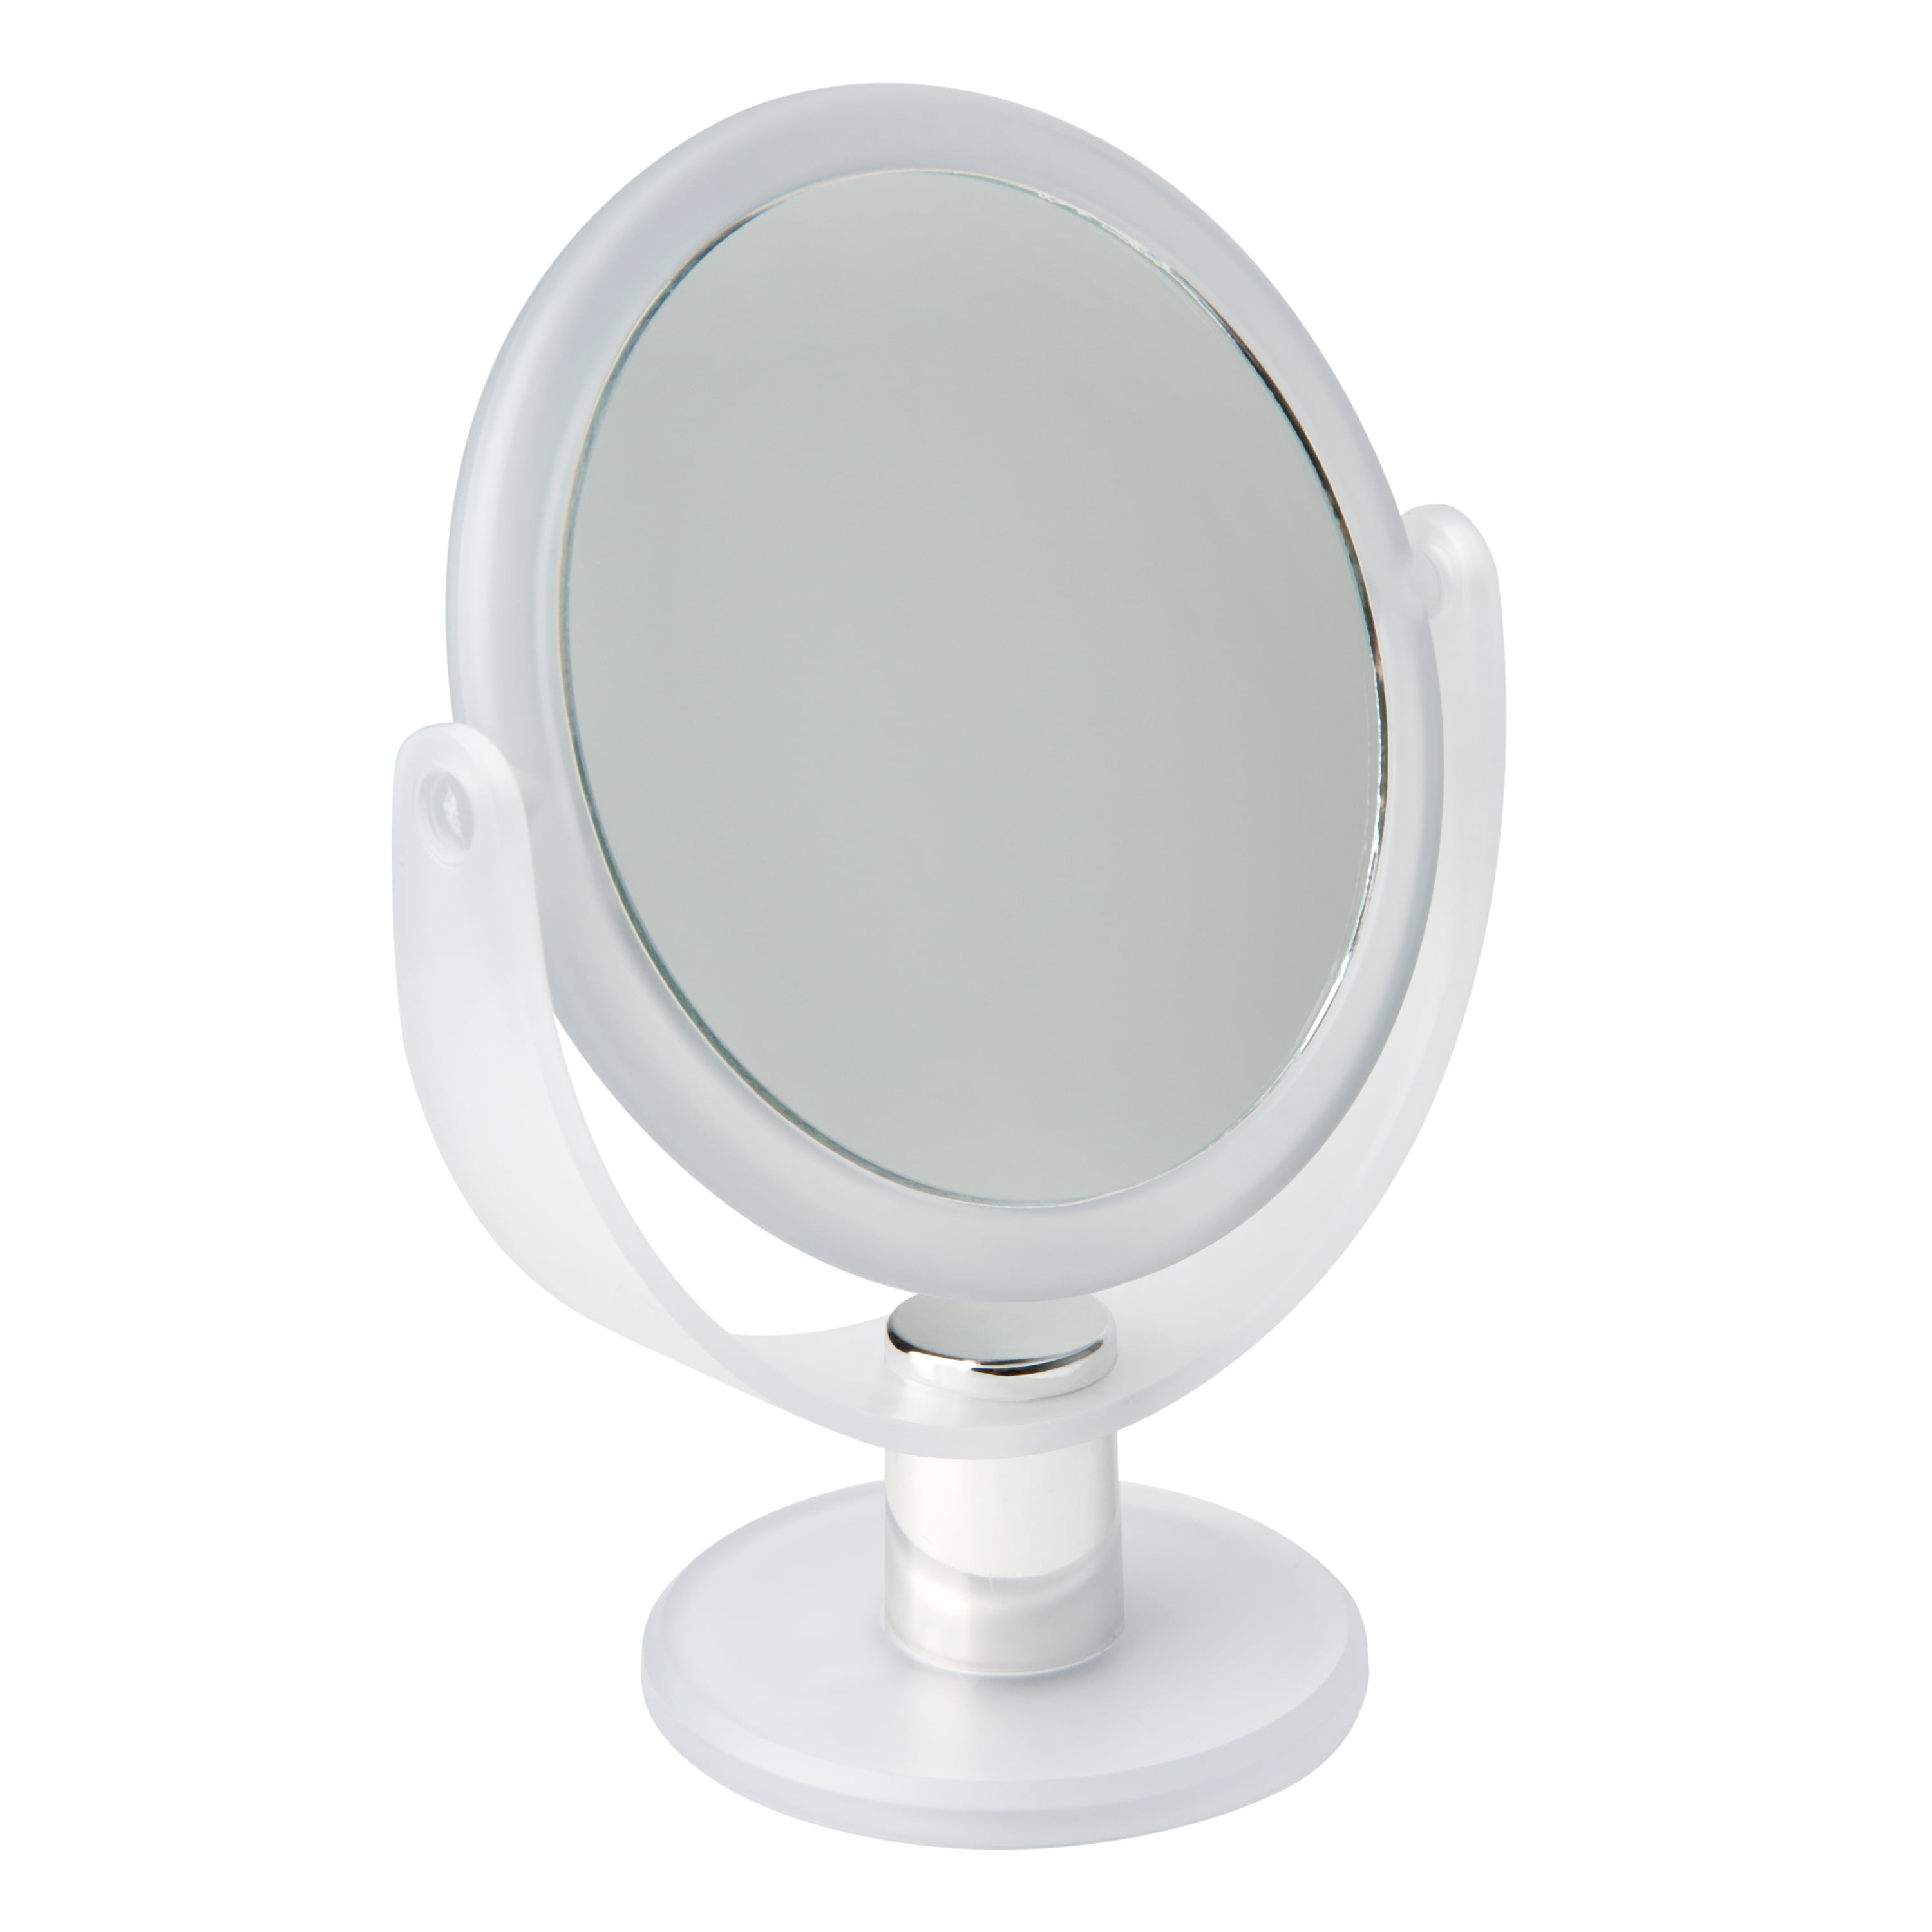 Ace Fog Resistant Shower Mirror 6 Mirrors 